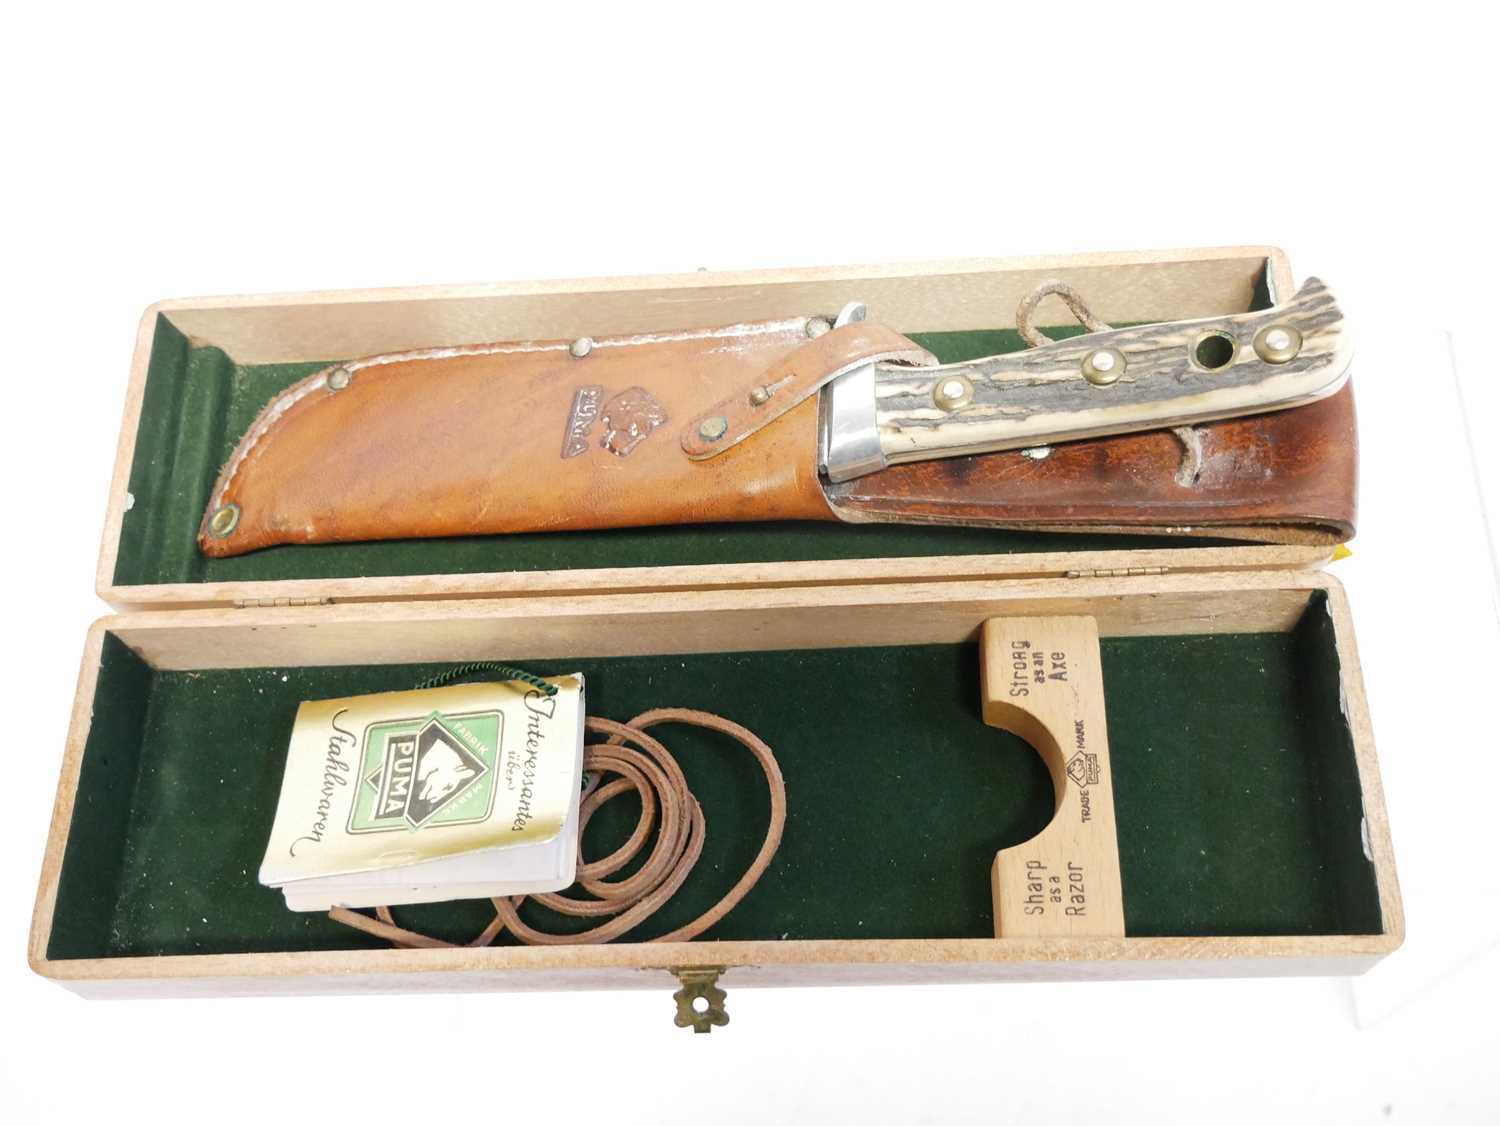 Puma White Hunter no.6377 knife, 6 inch blade, stag horn grips, with leather sheath and box. Buyer - Image 6 of 6